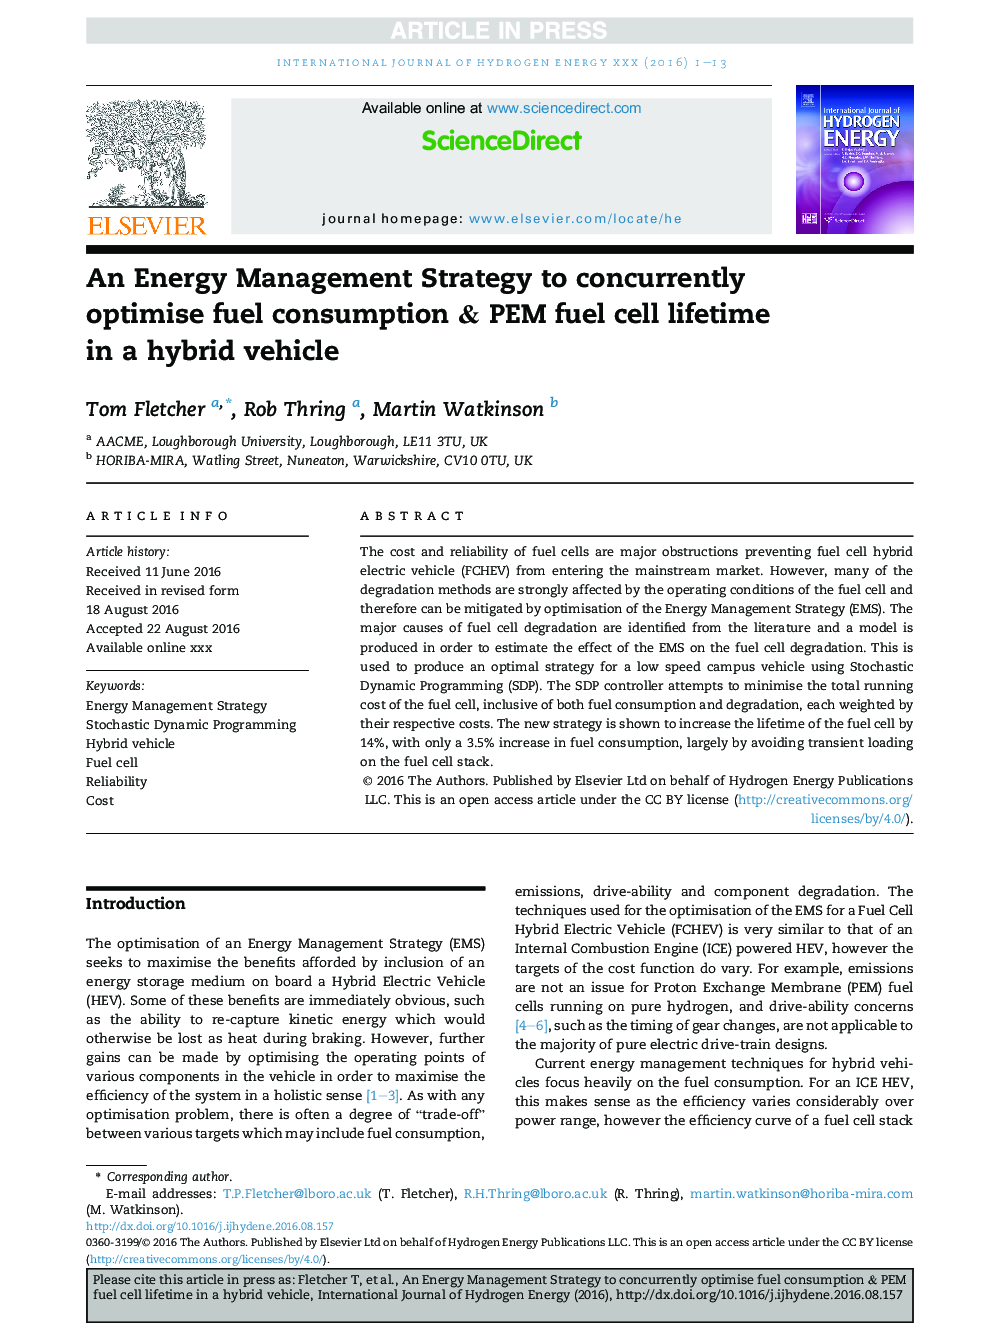 An Energy Management Strategy to concurrently optimise fuel consumption & PEM fuel cell lifetime in a hybrid vehicle